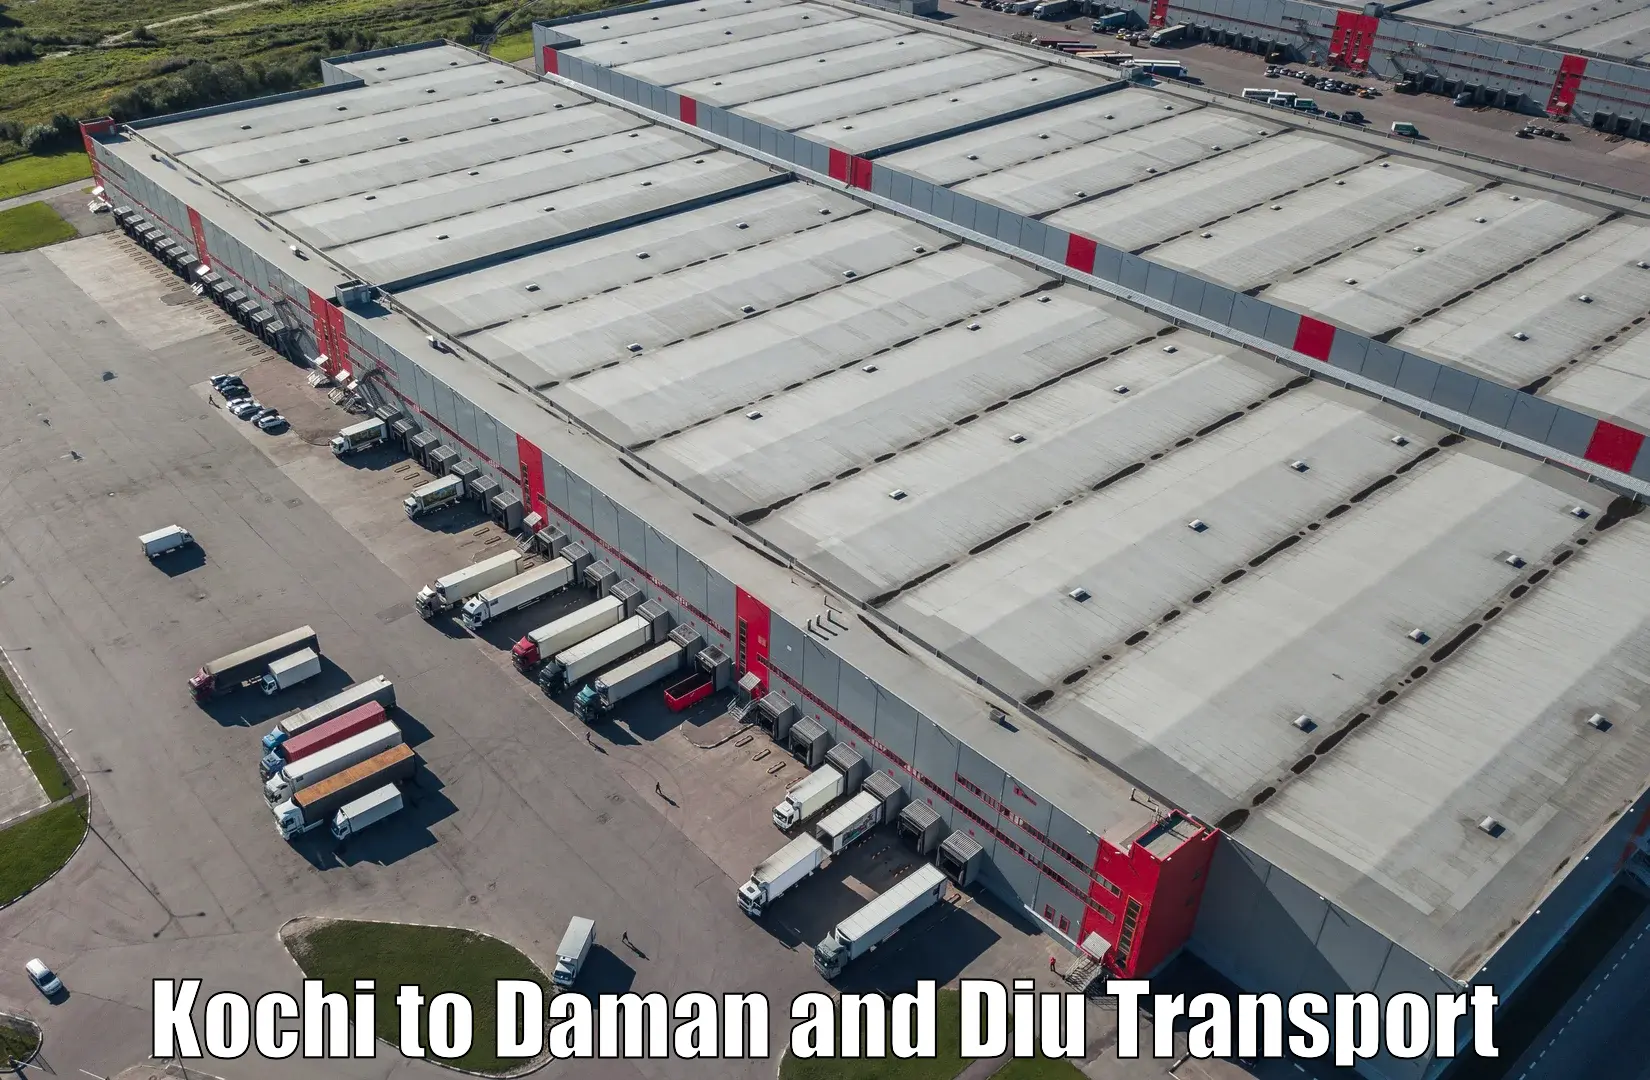 Air freight transport services in Kochi to Daman and Diu